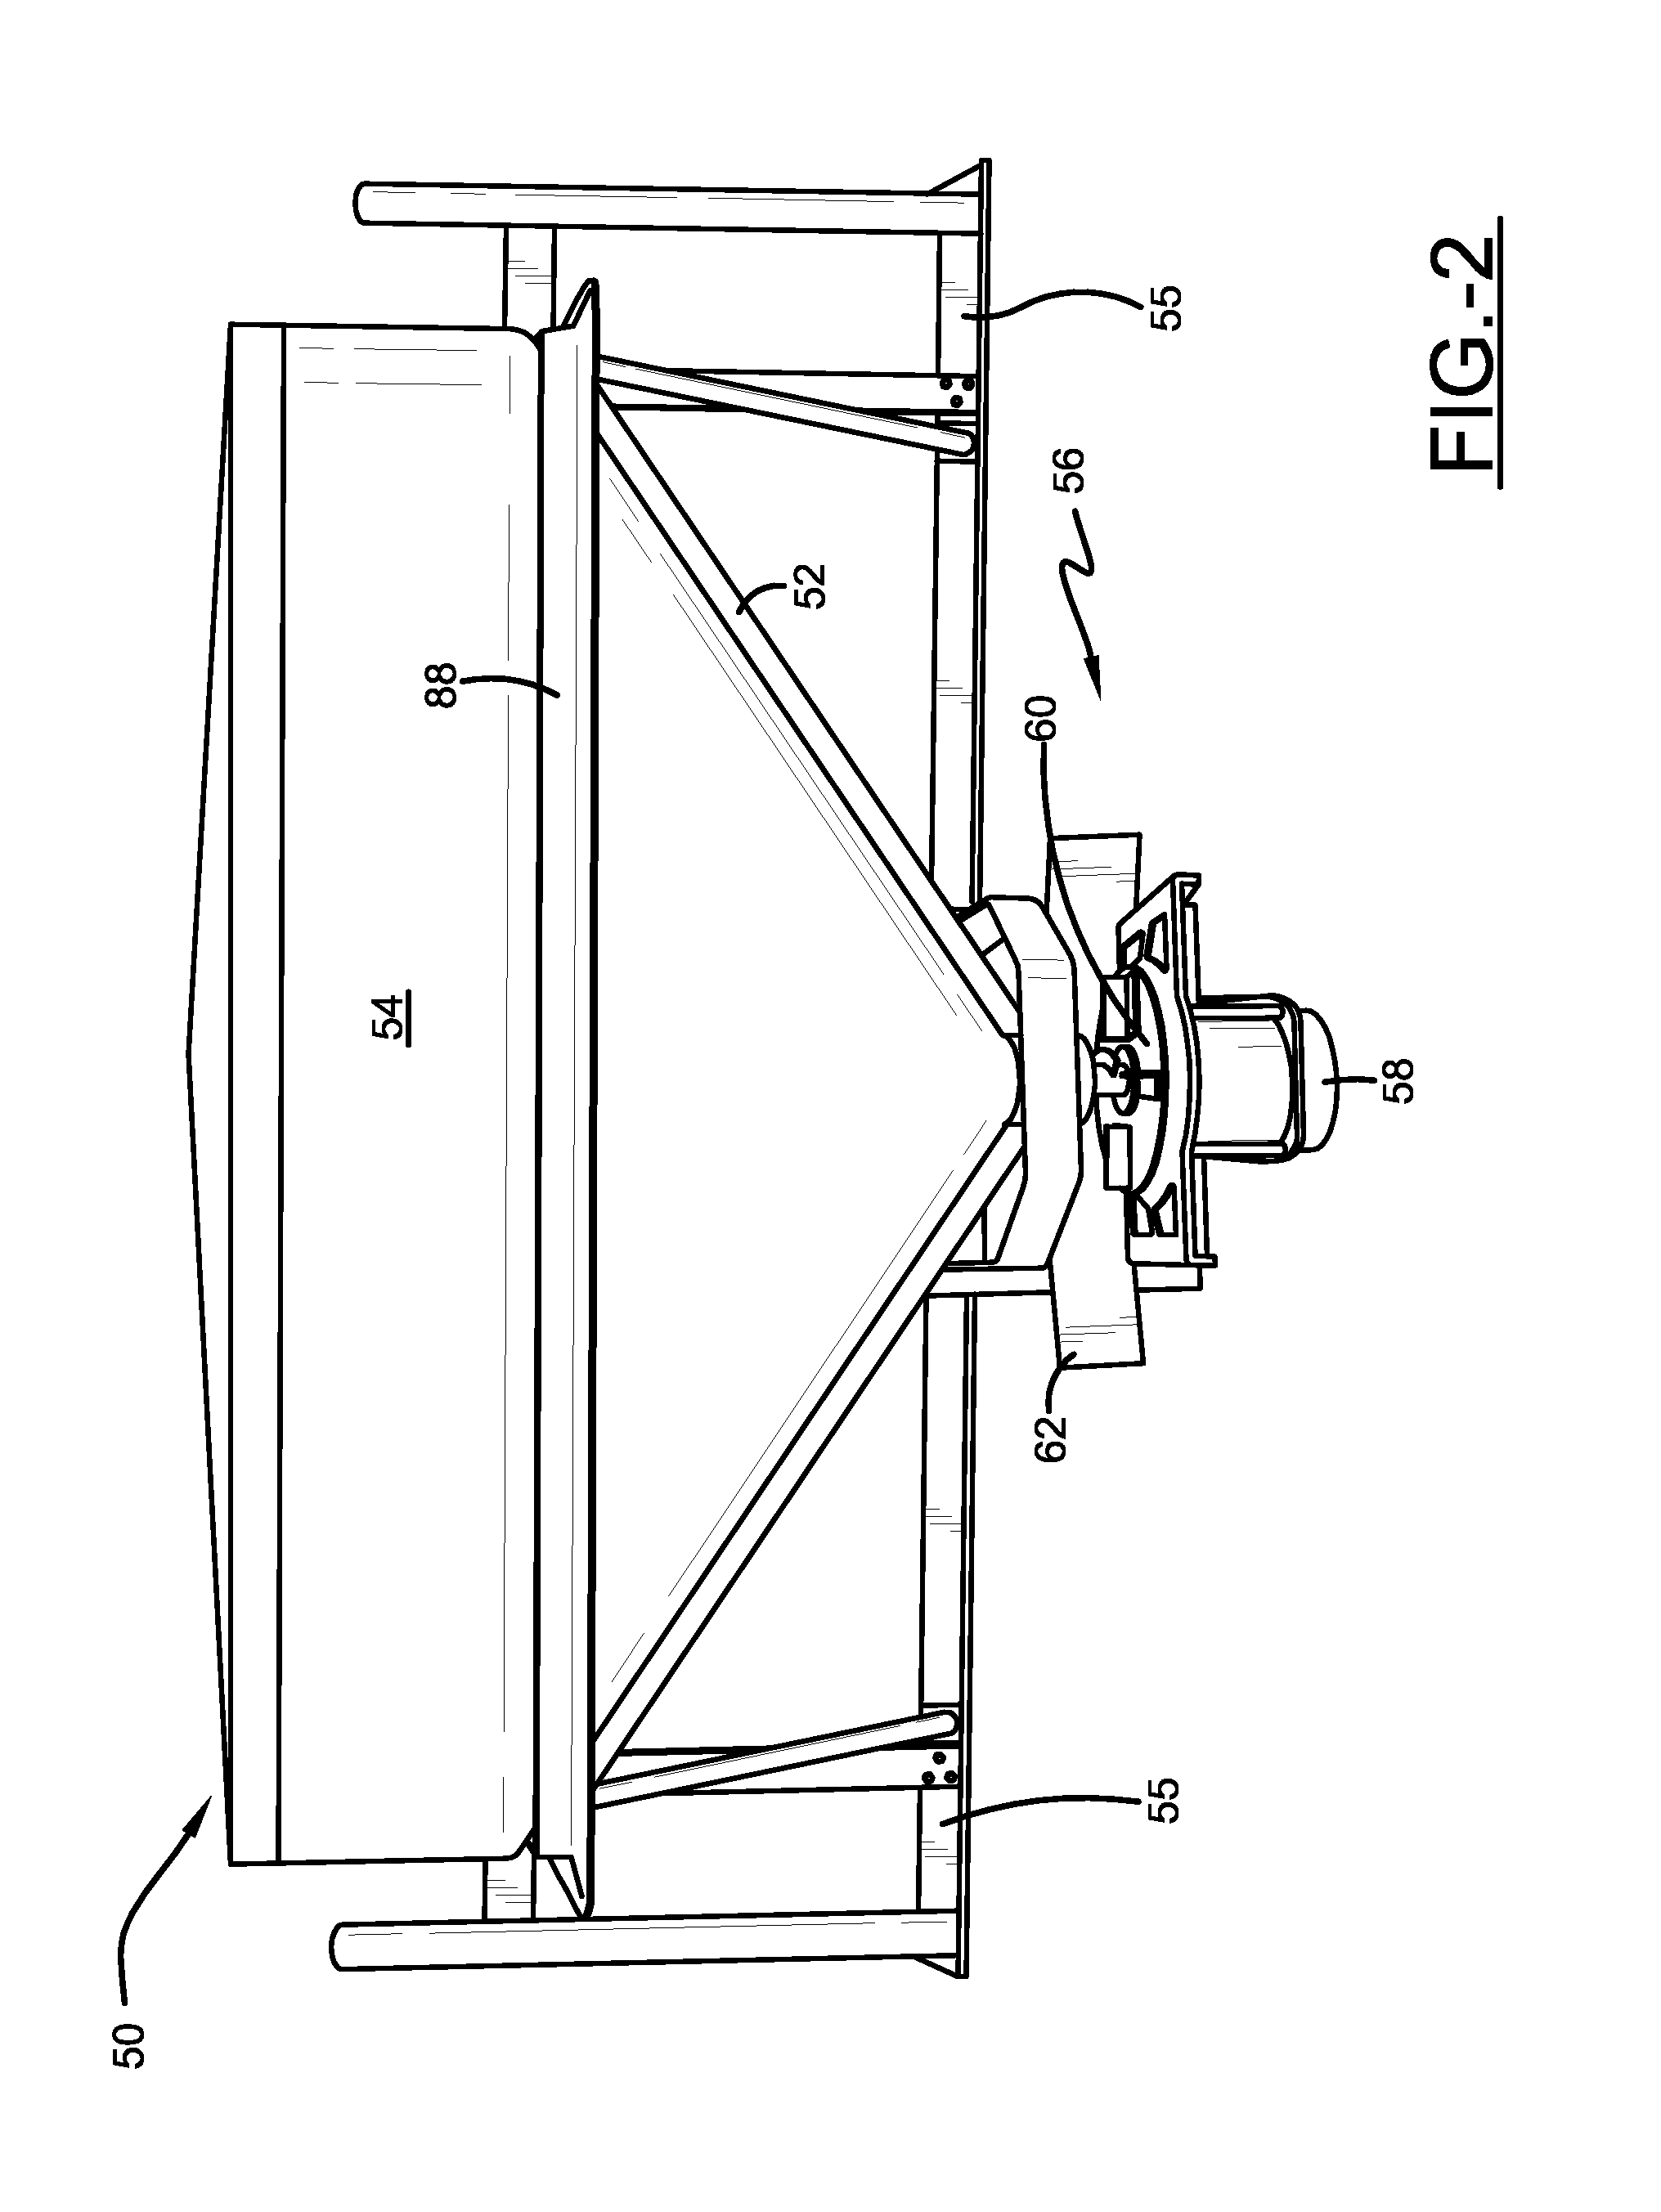 Method and apparatus for stopping a spreader